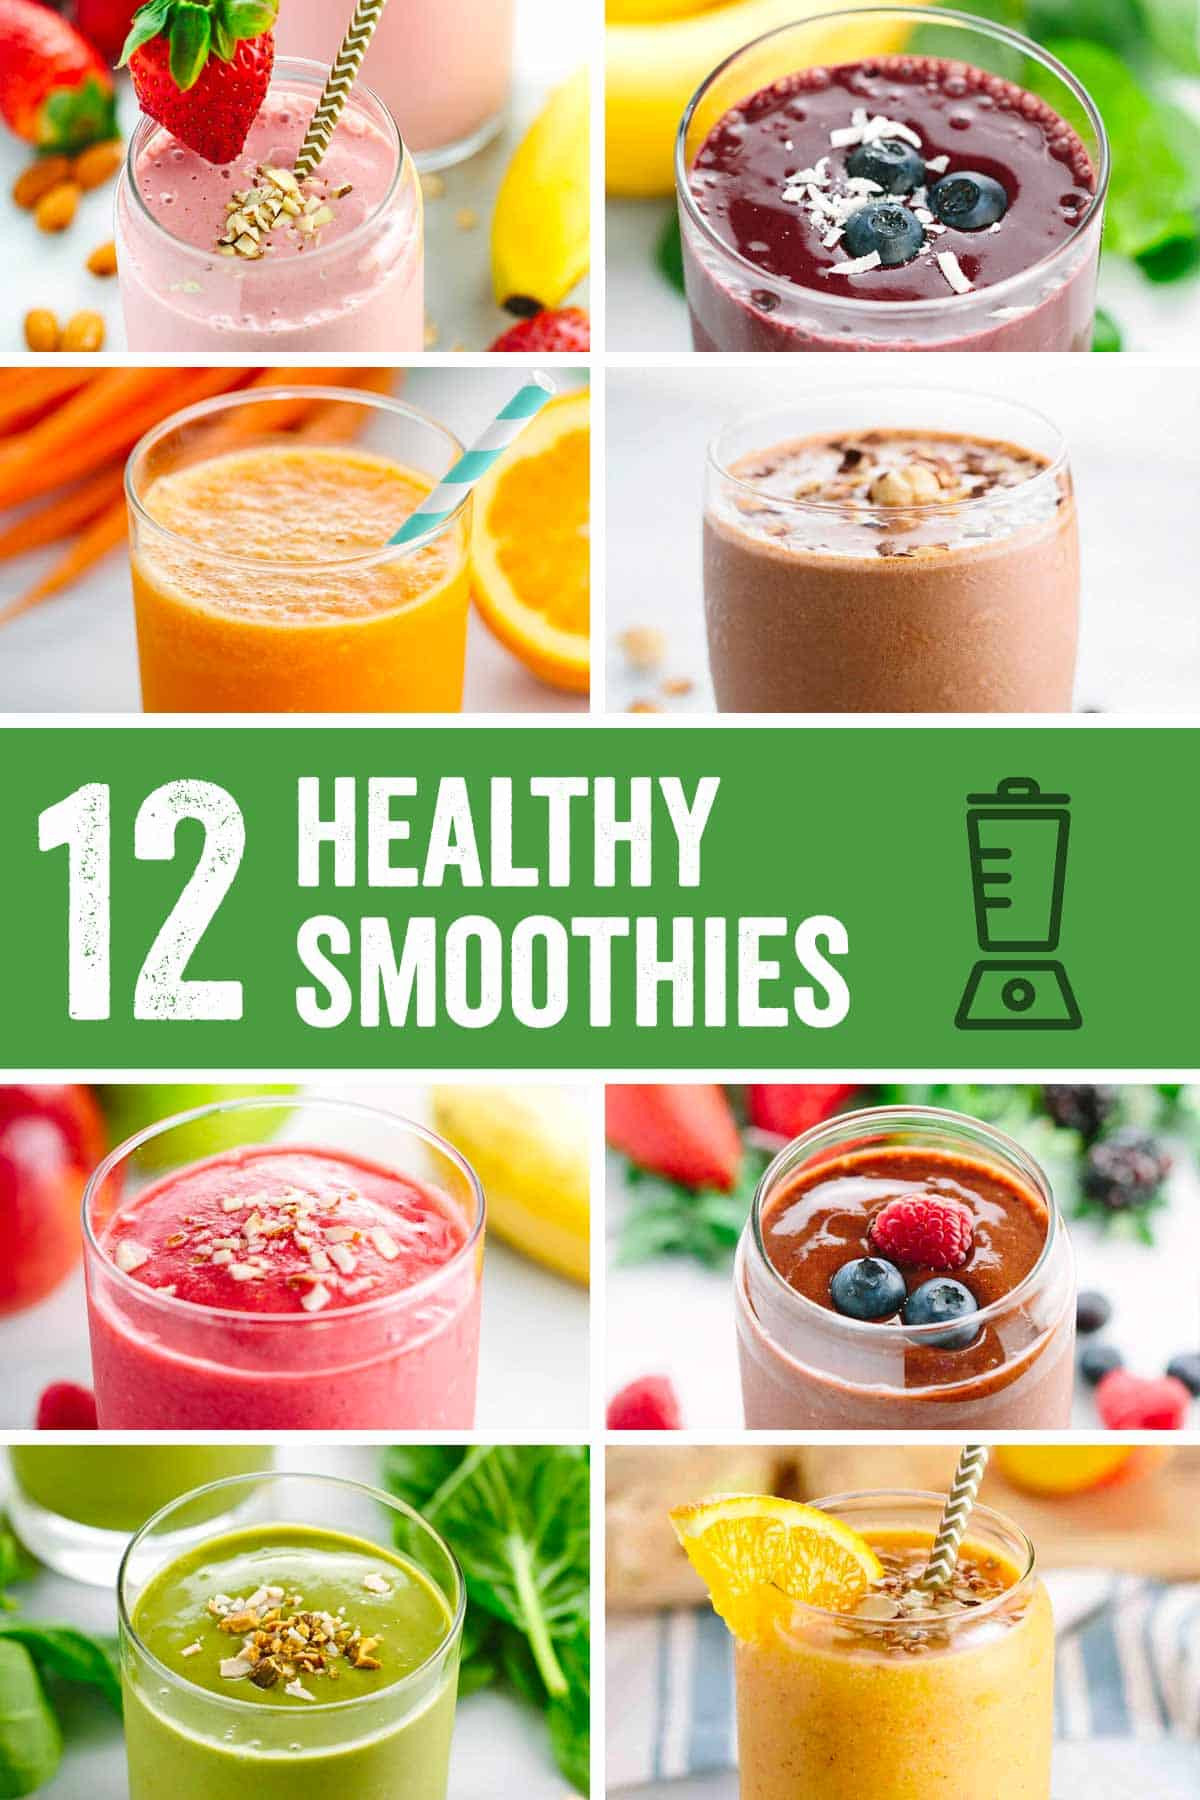 Smoothie Recipes Healthy
 Roundup Easy Five Minute Healthy Smoothie Recipes